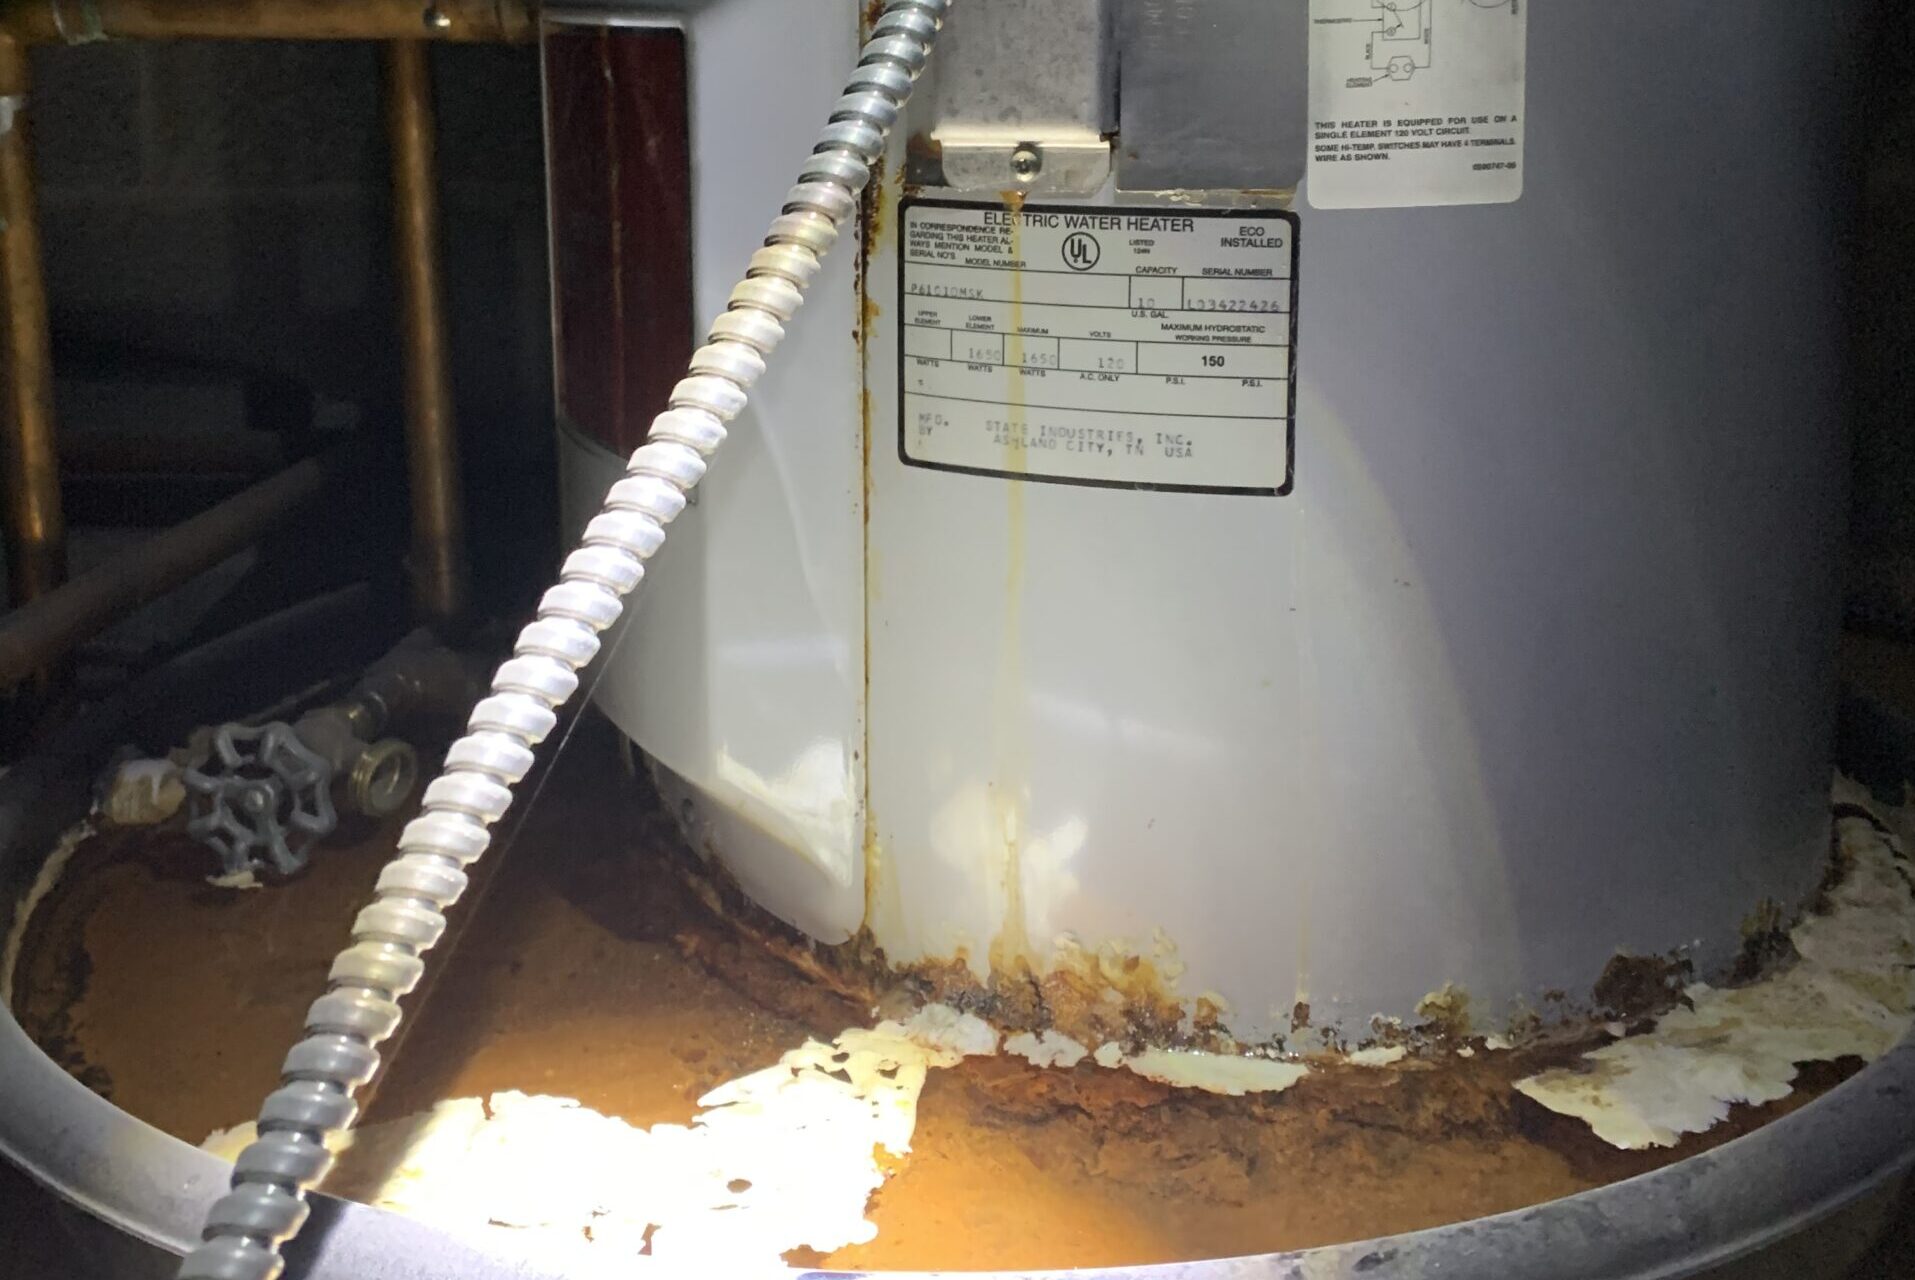 Water Heater Before Replacement